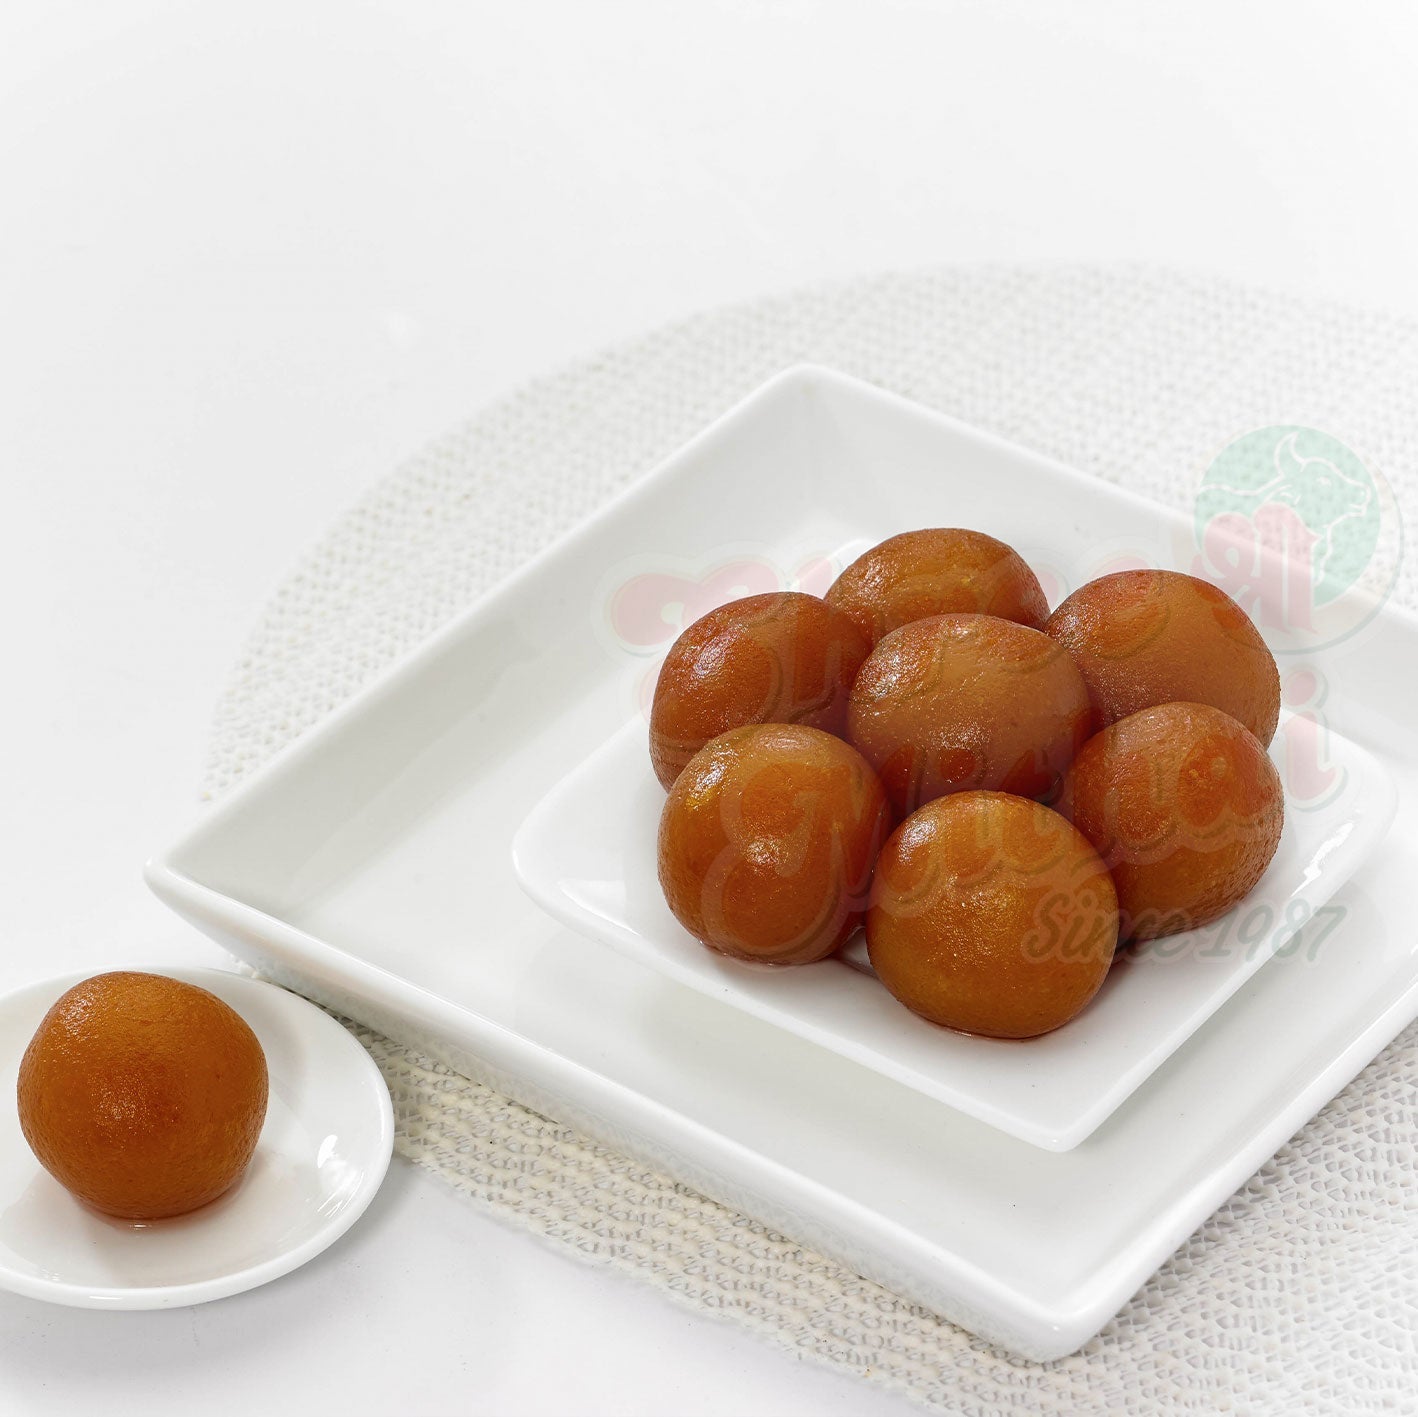 Buy Gits Gulab Jamun - Open & Eat, No Added Preservatives, Colours &  Flavours Online at Best Price of Rs 224.4 - bigbasket